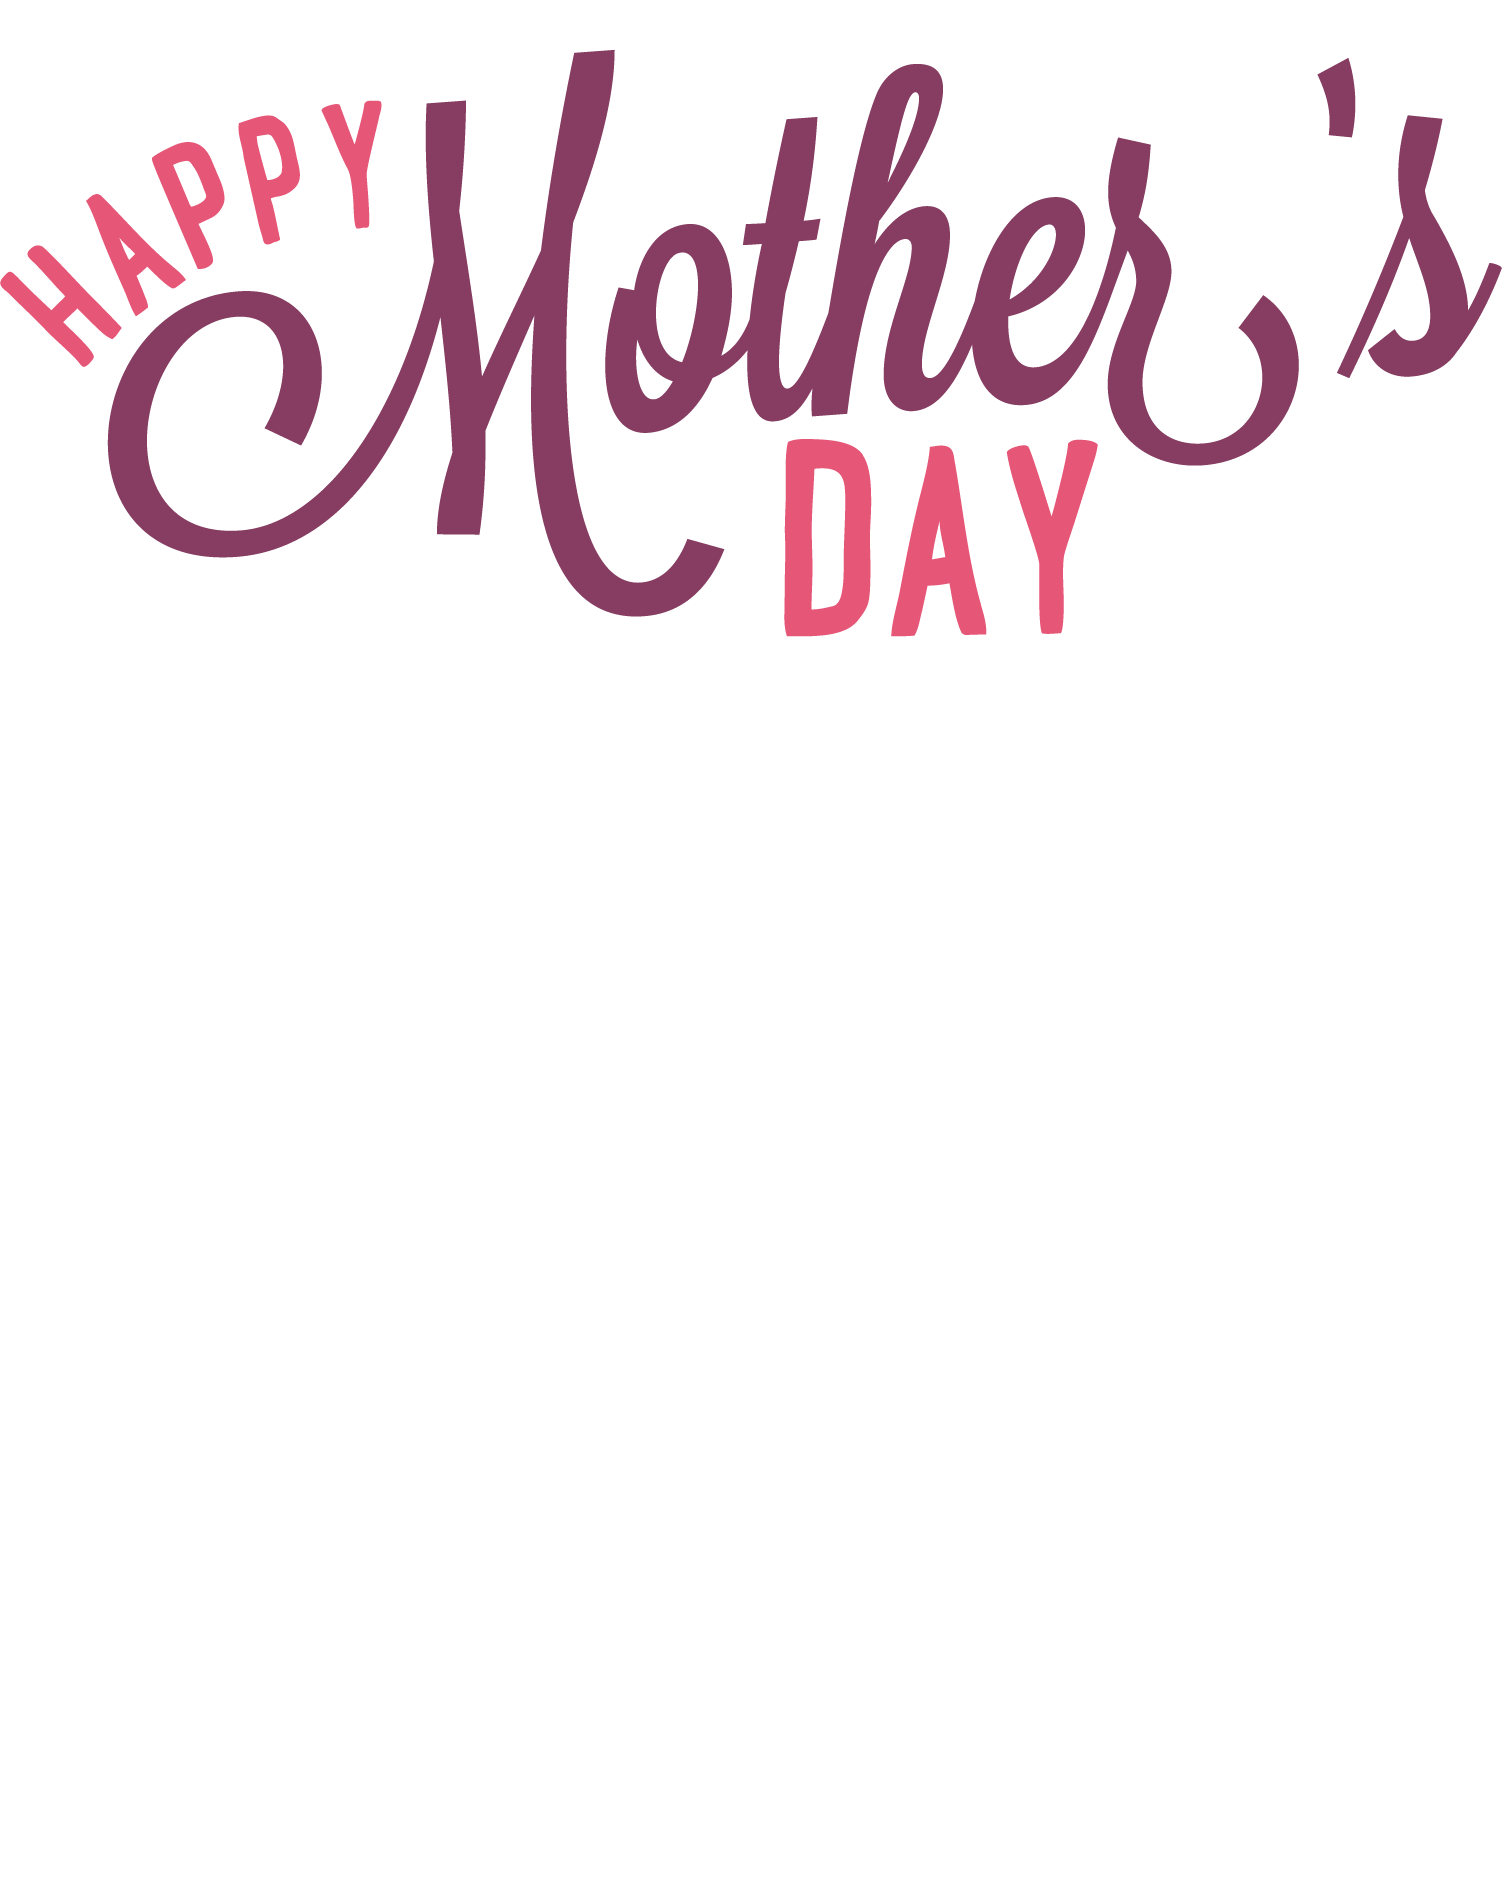 Happy Mothers Day GIF Images 2018